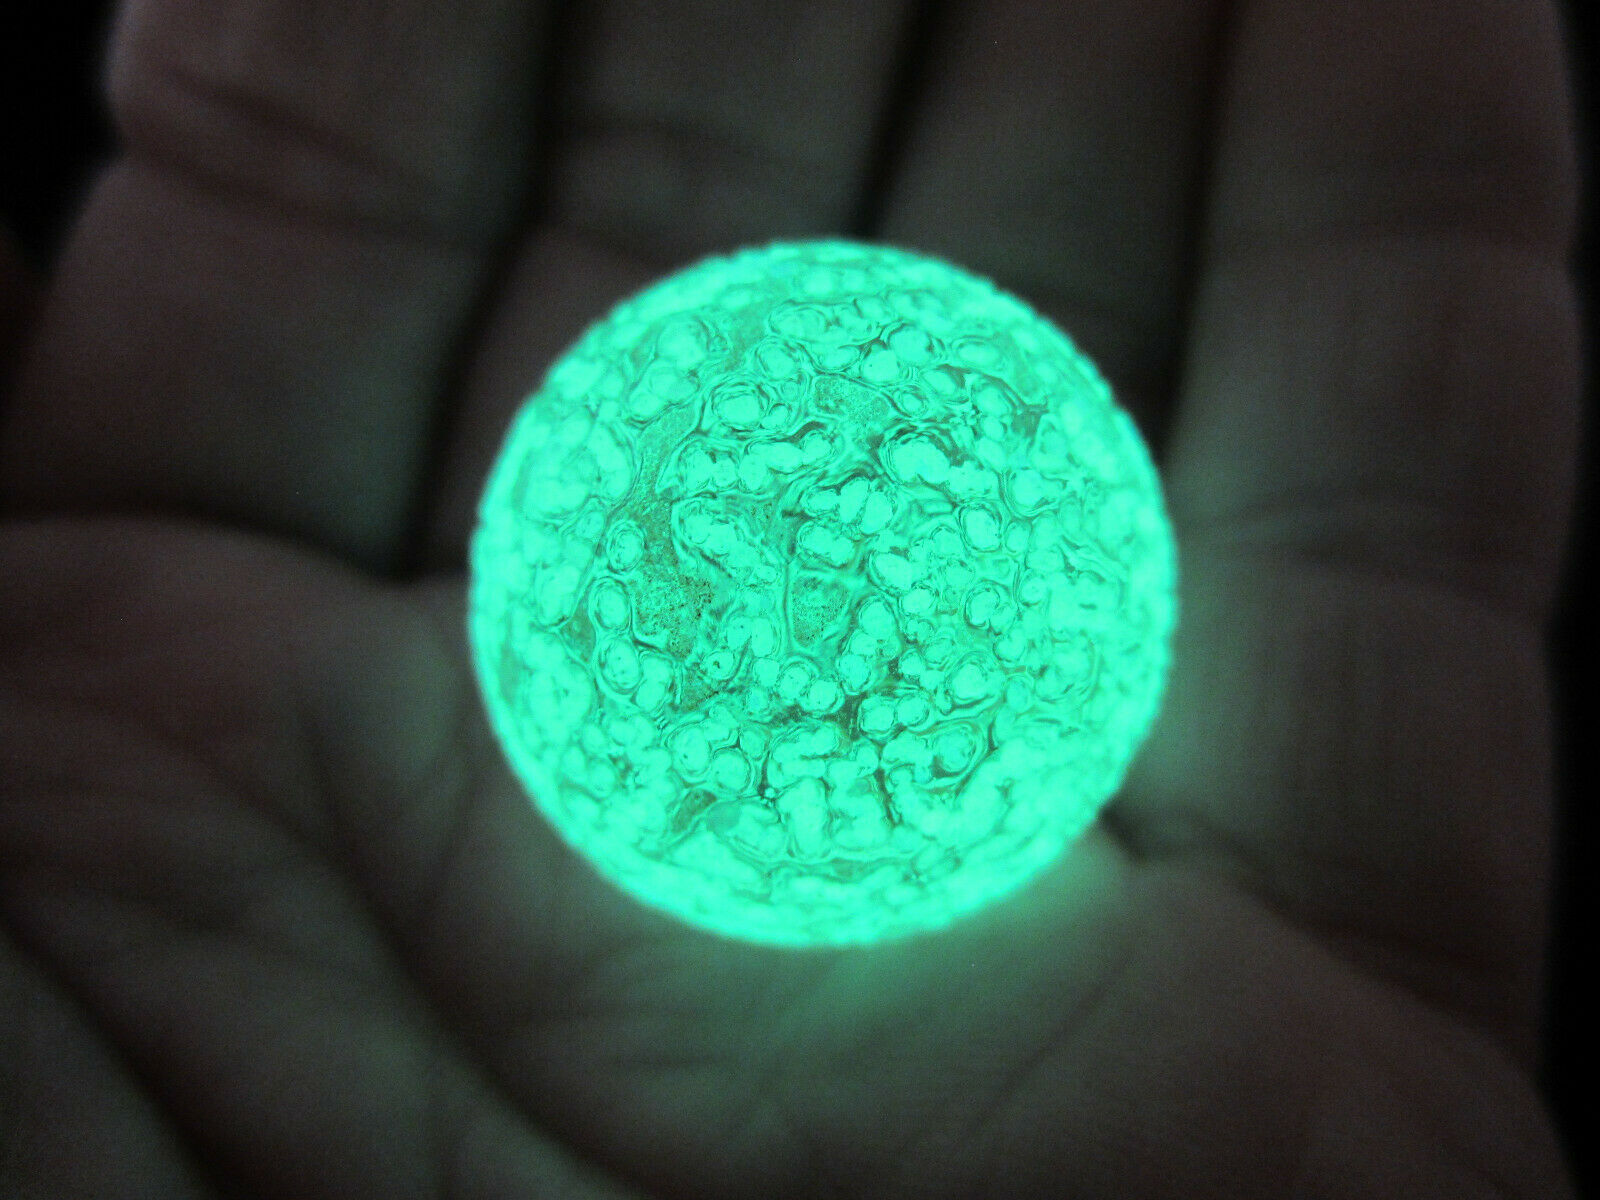 25mm Glow In The Dark Shooter Glass Mib Marbles Ball Large 1"